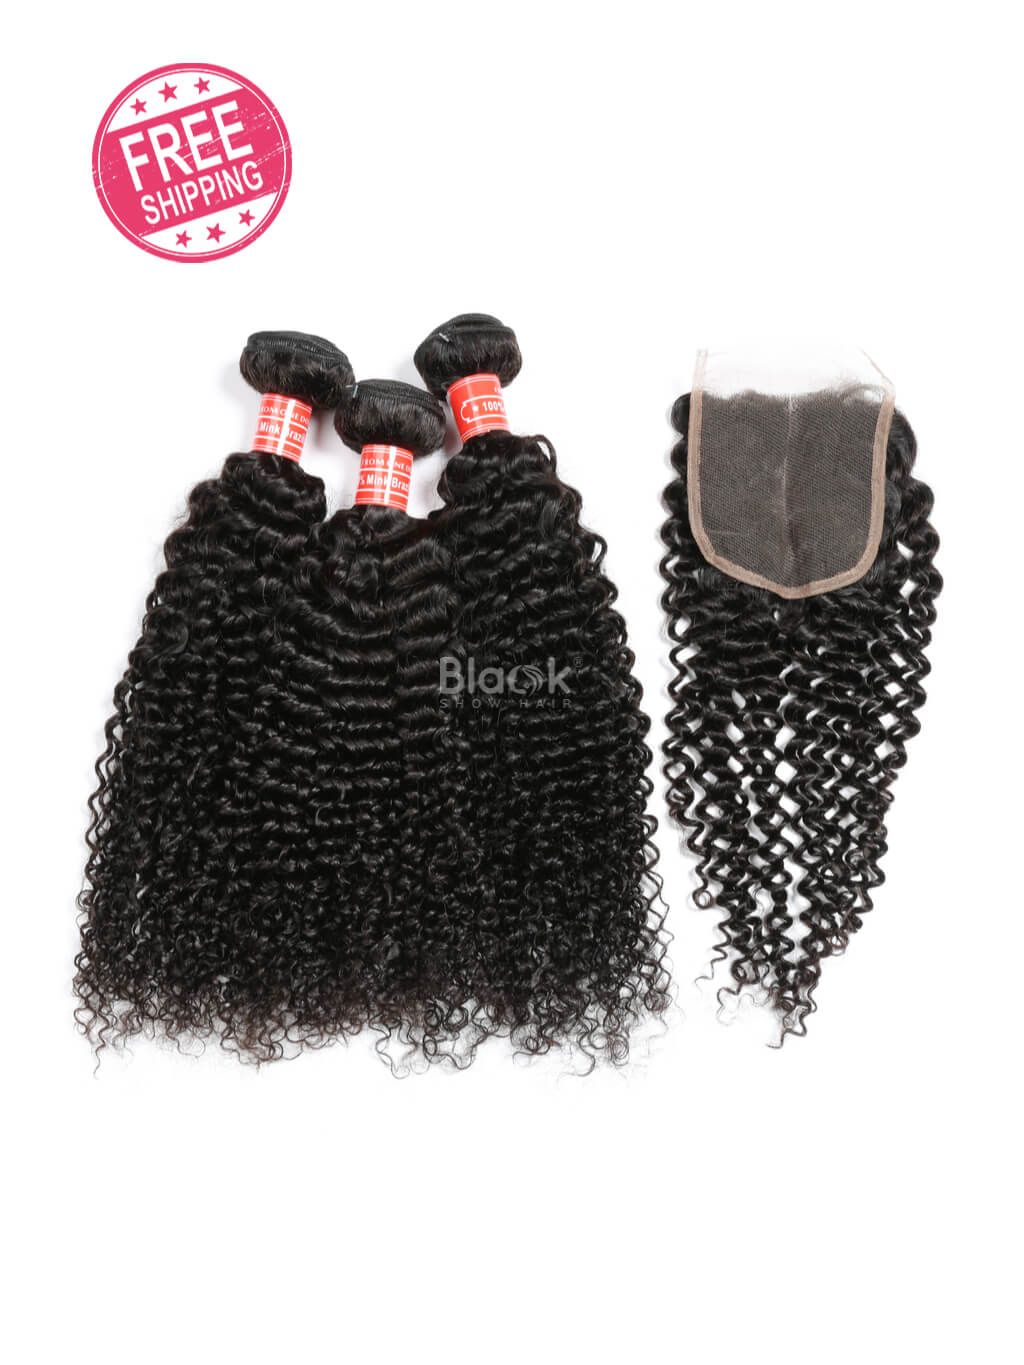 curly weave bundles with closure 4x4 mink brazilian hair